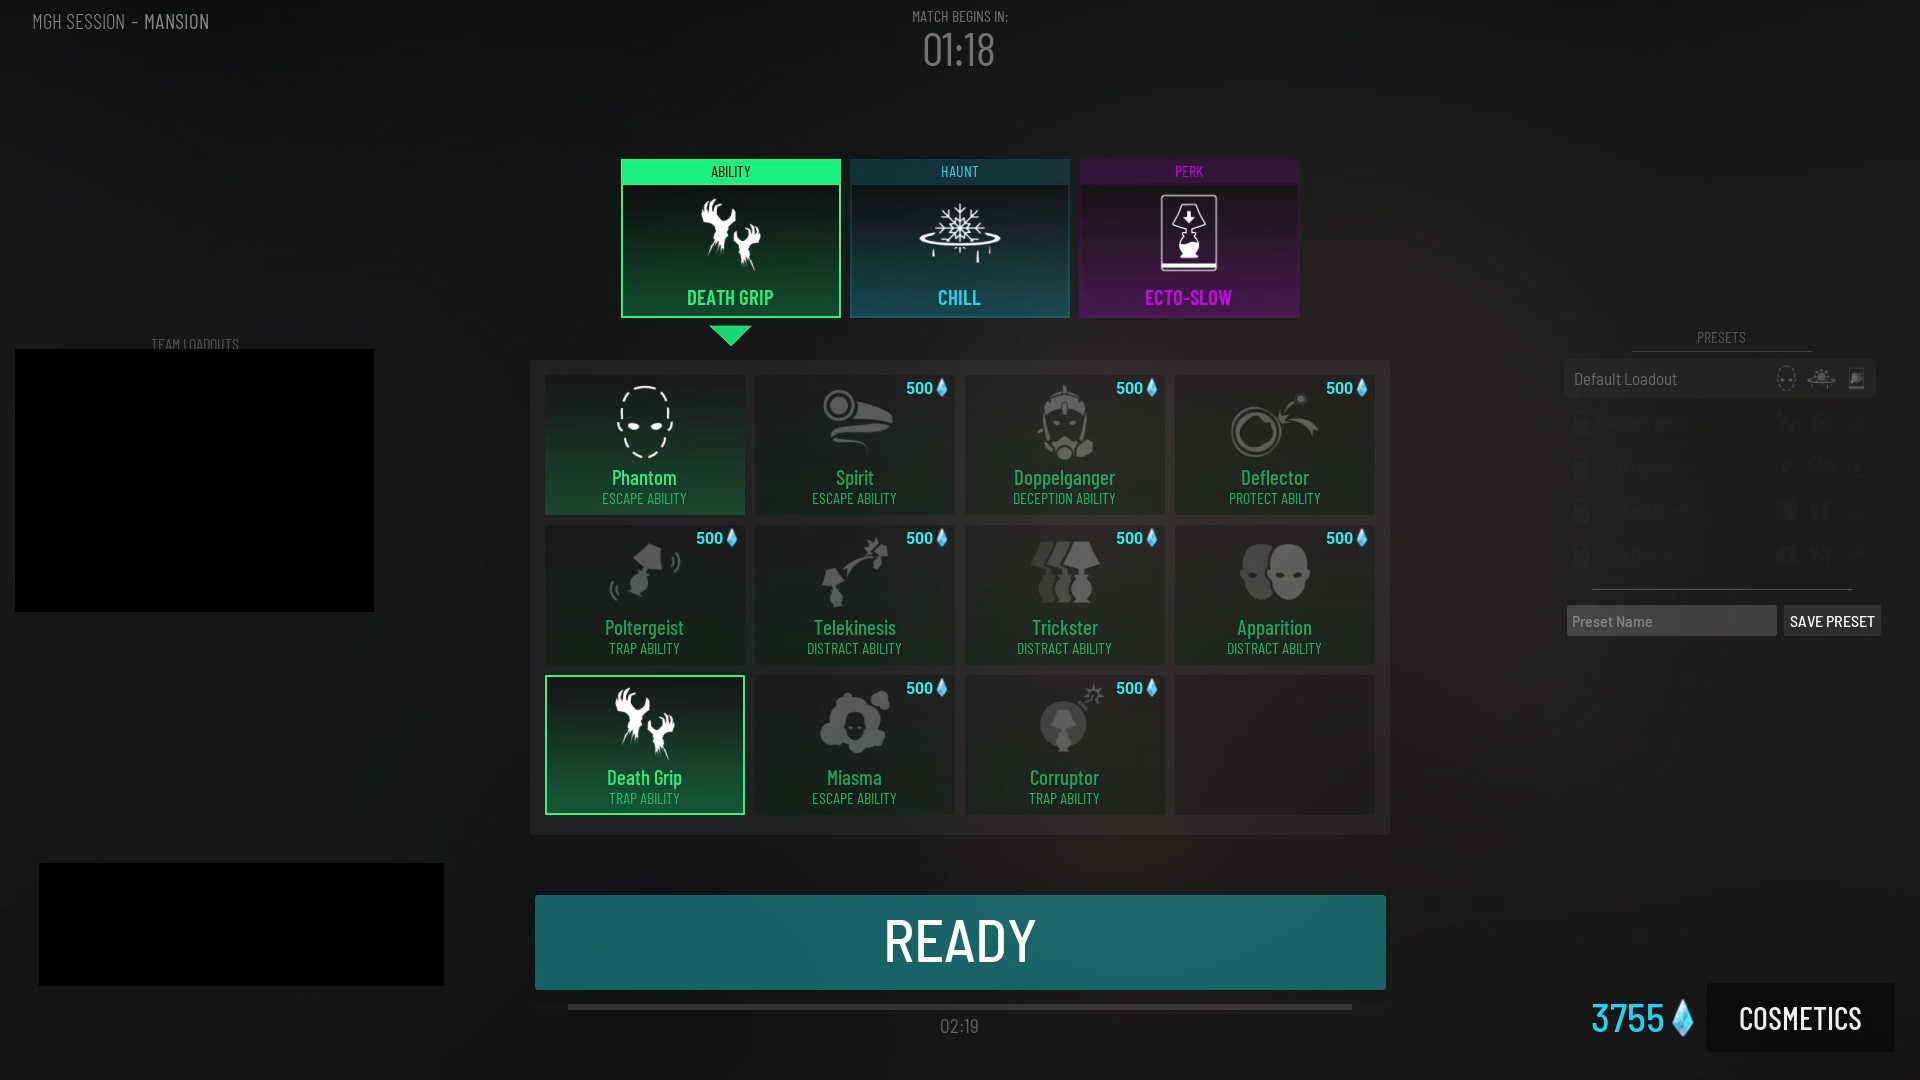 Ghost ability loadout